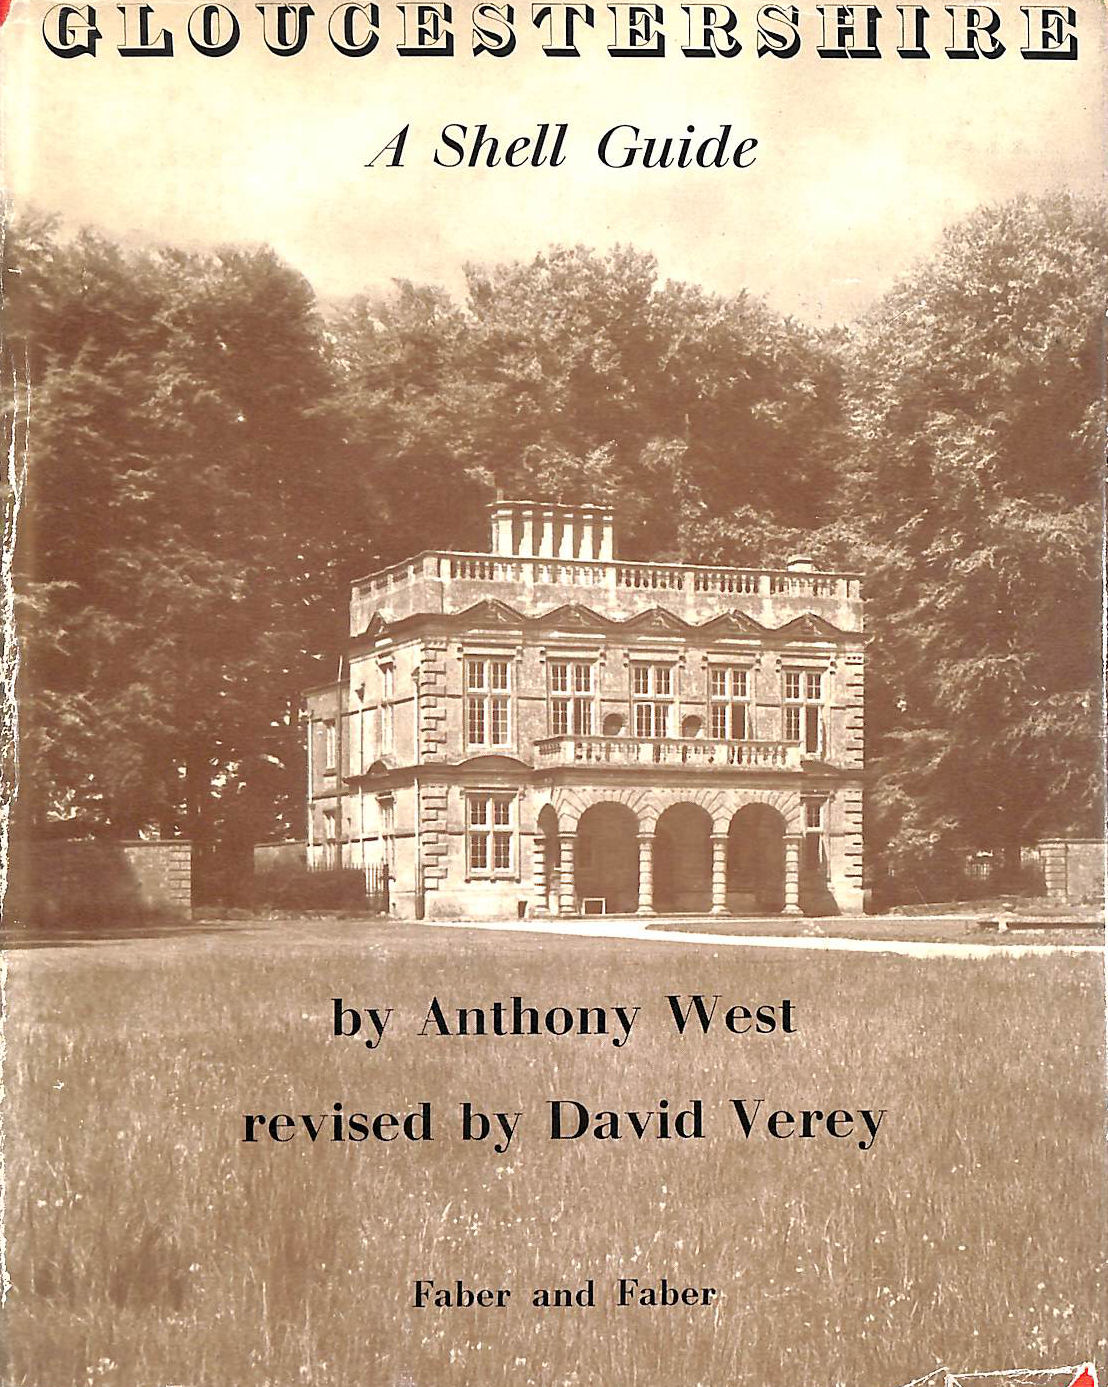 WEST ANTHONY, REVISED BY DAVID VEREY - Gloucestershire a Shell Guide